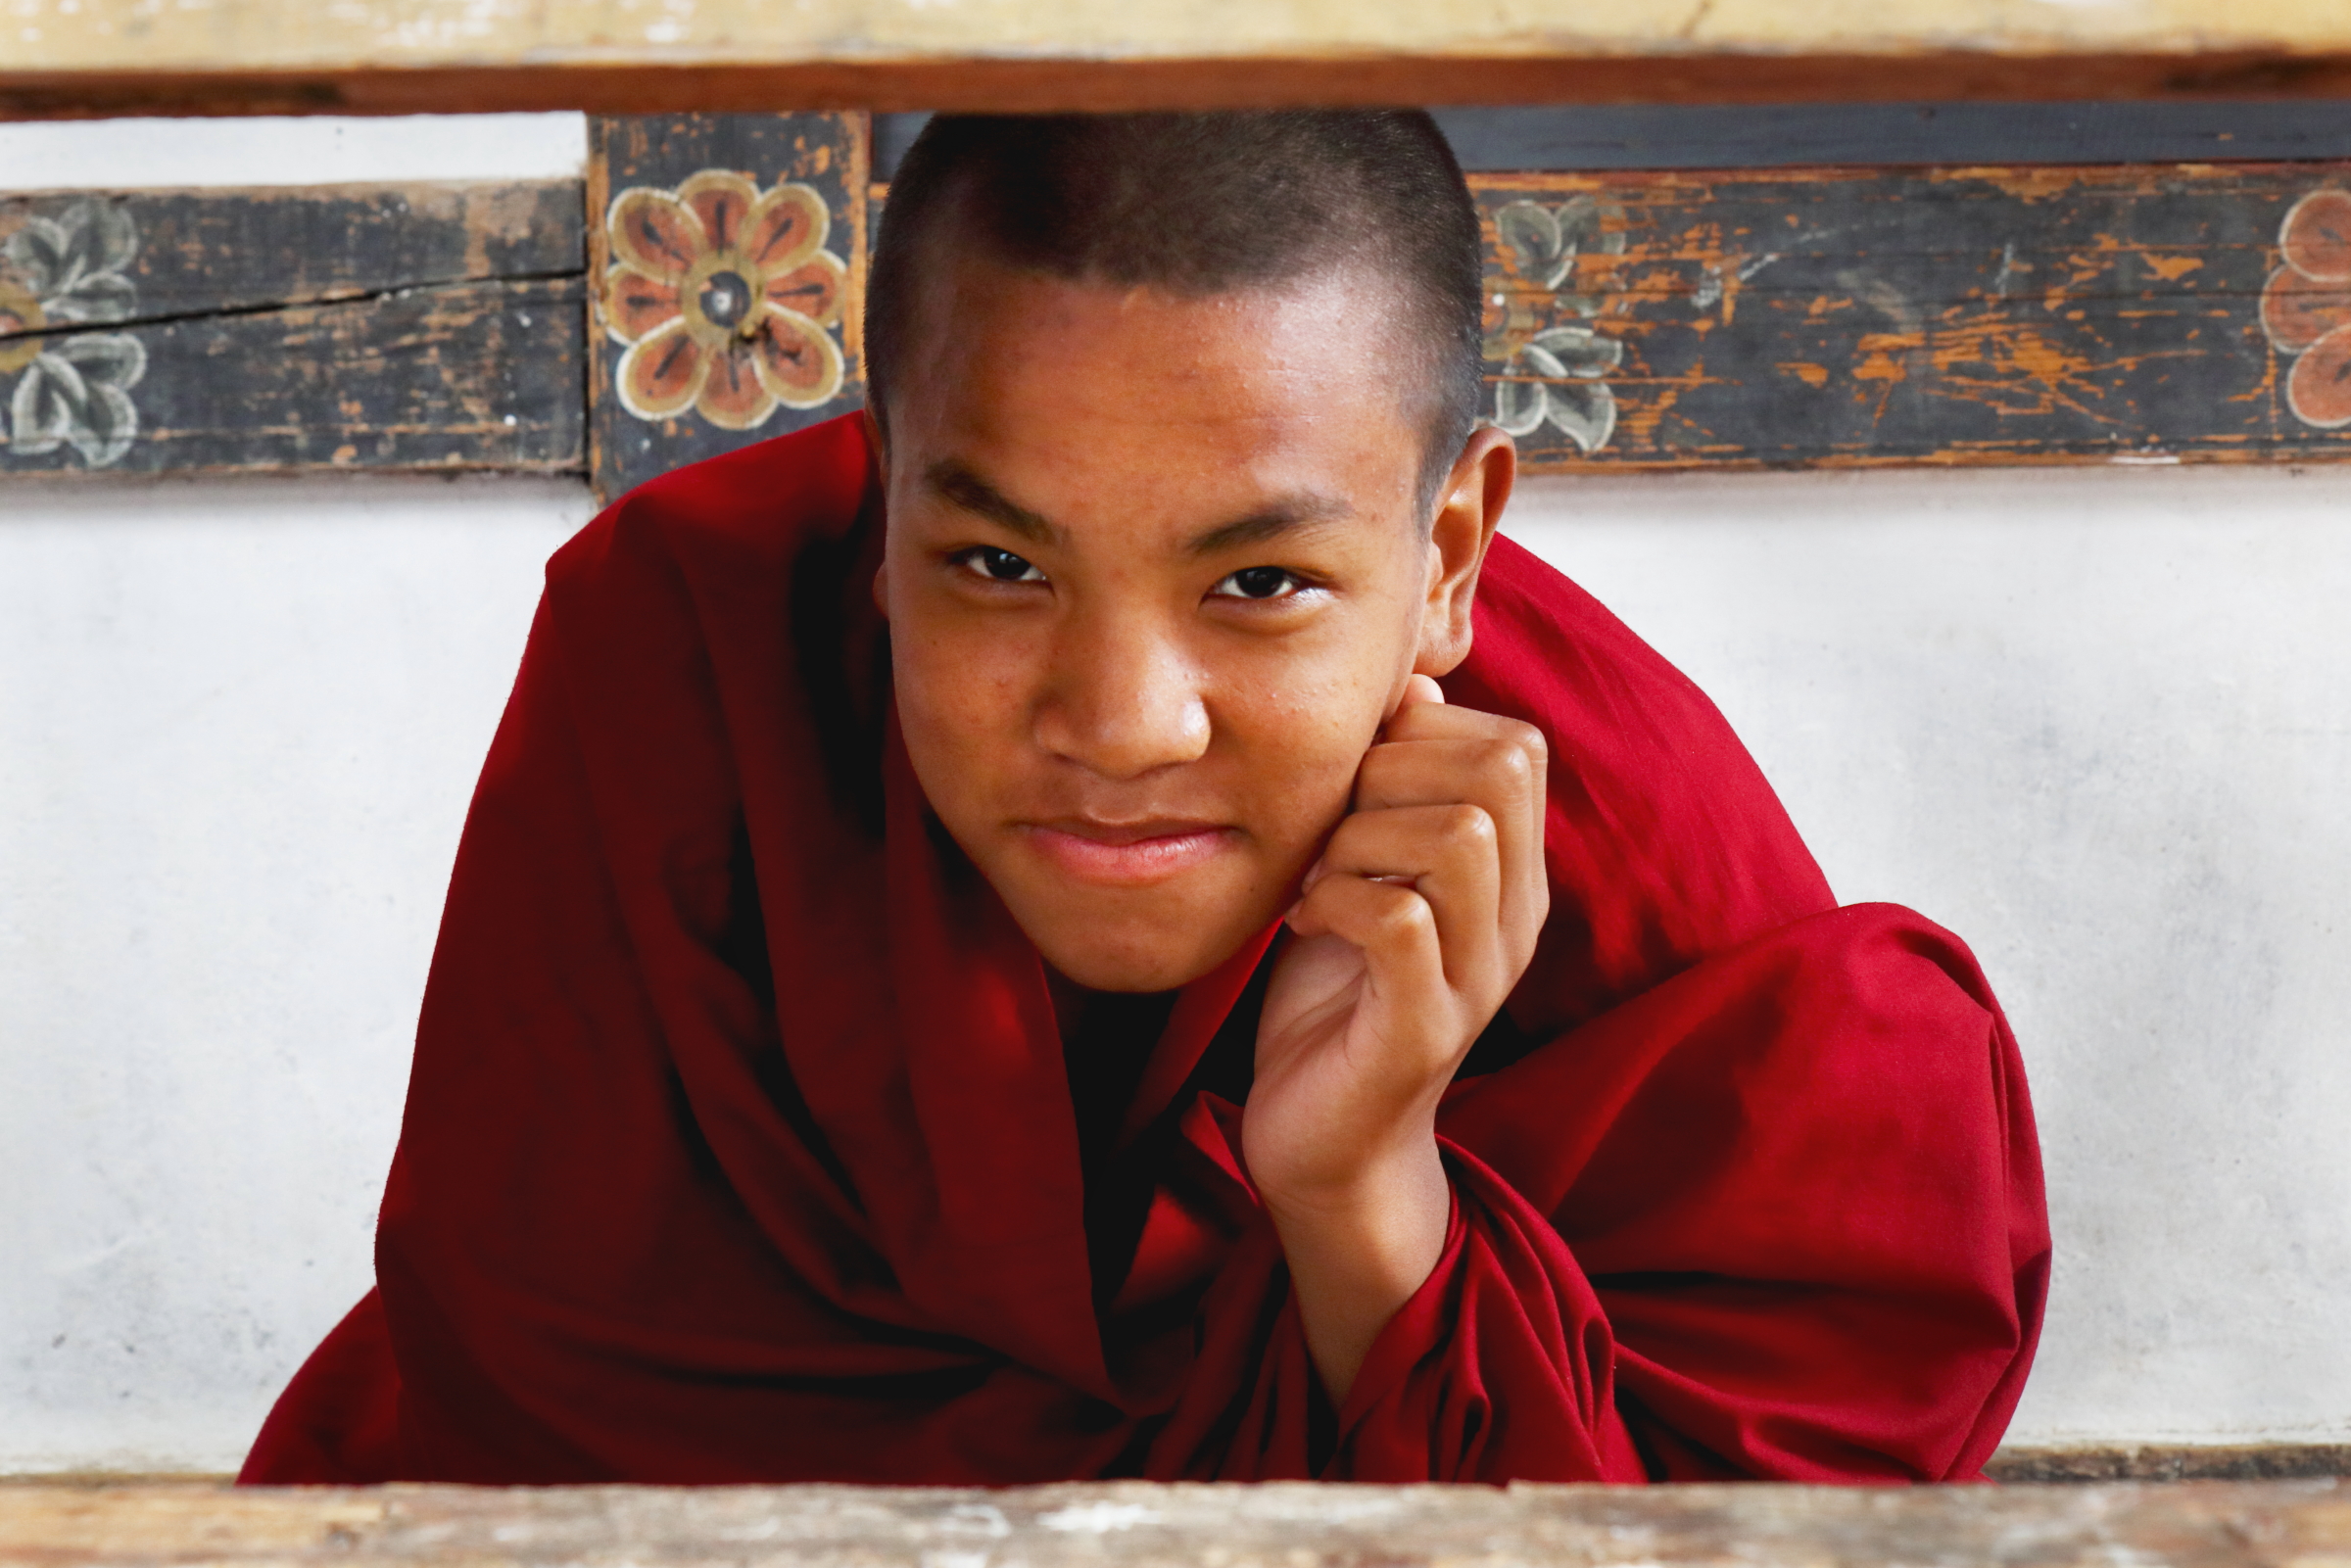 5th image from my "Portrait from Bhutan" series. A young disciple from Khuruthang Manastery in Bhutan.